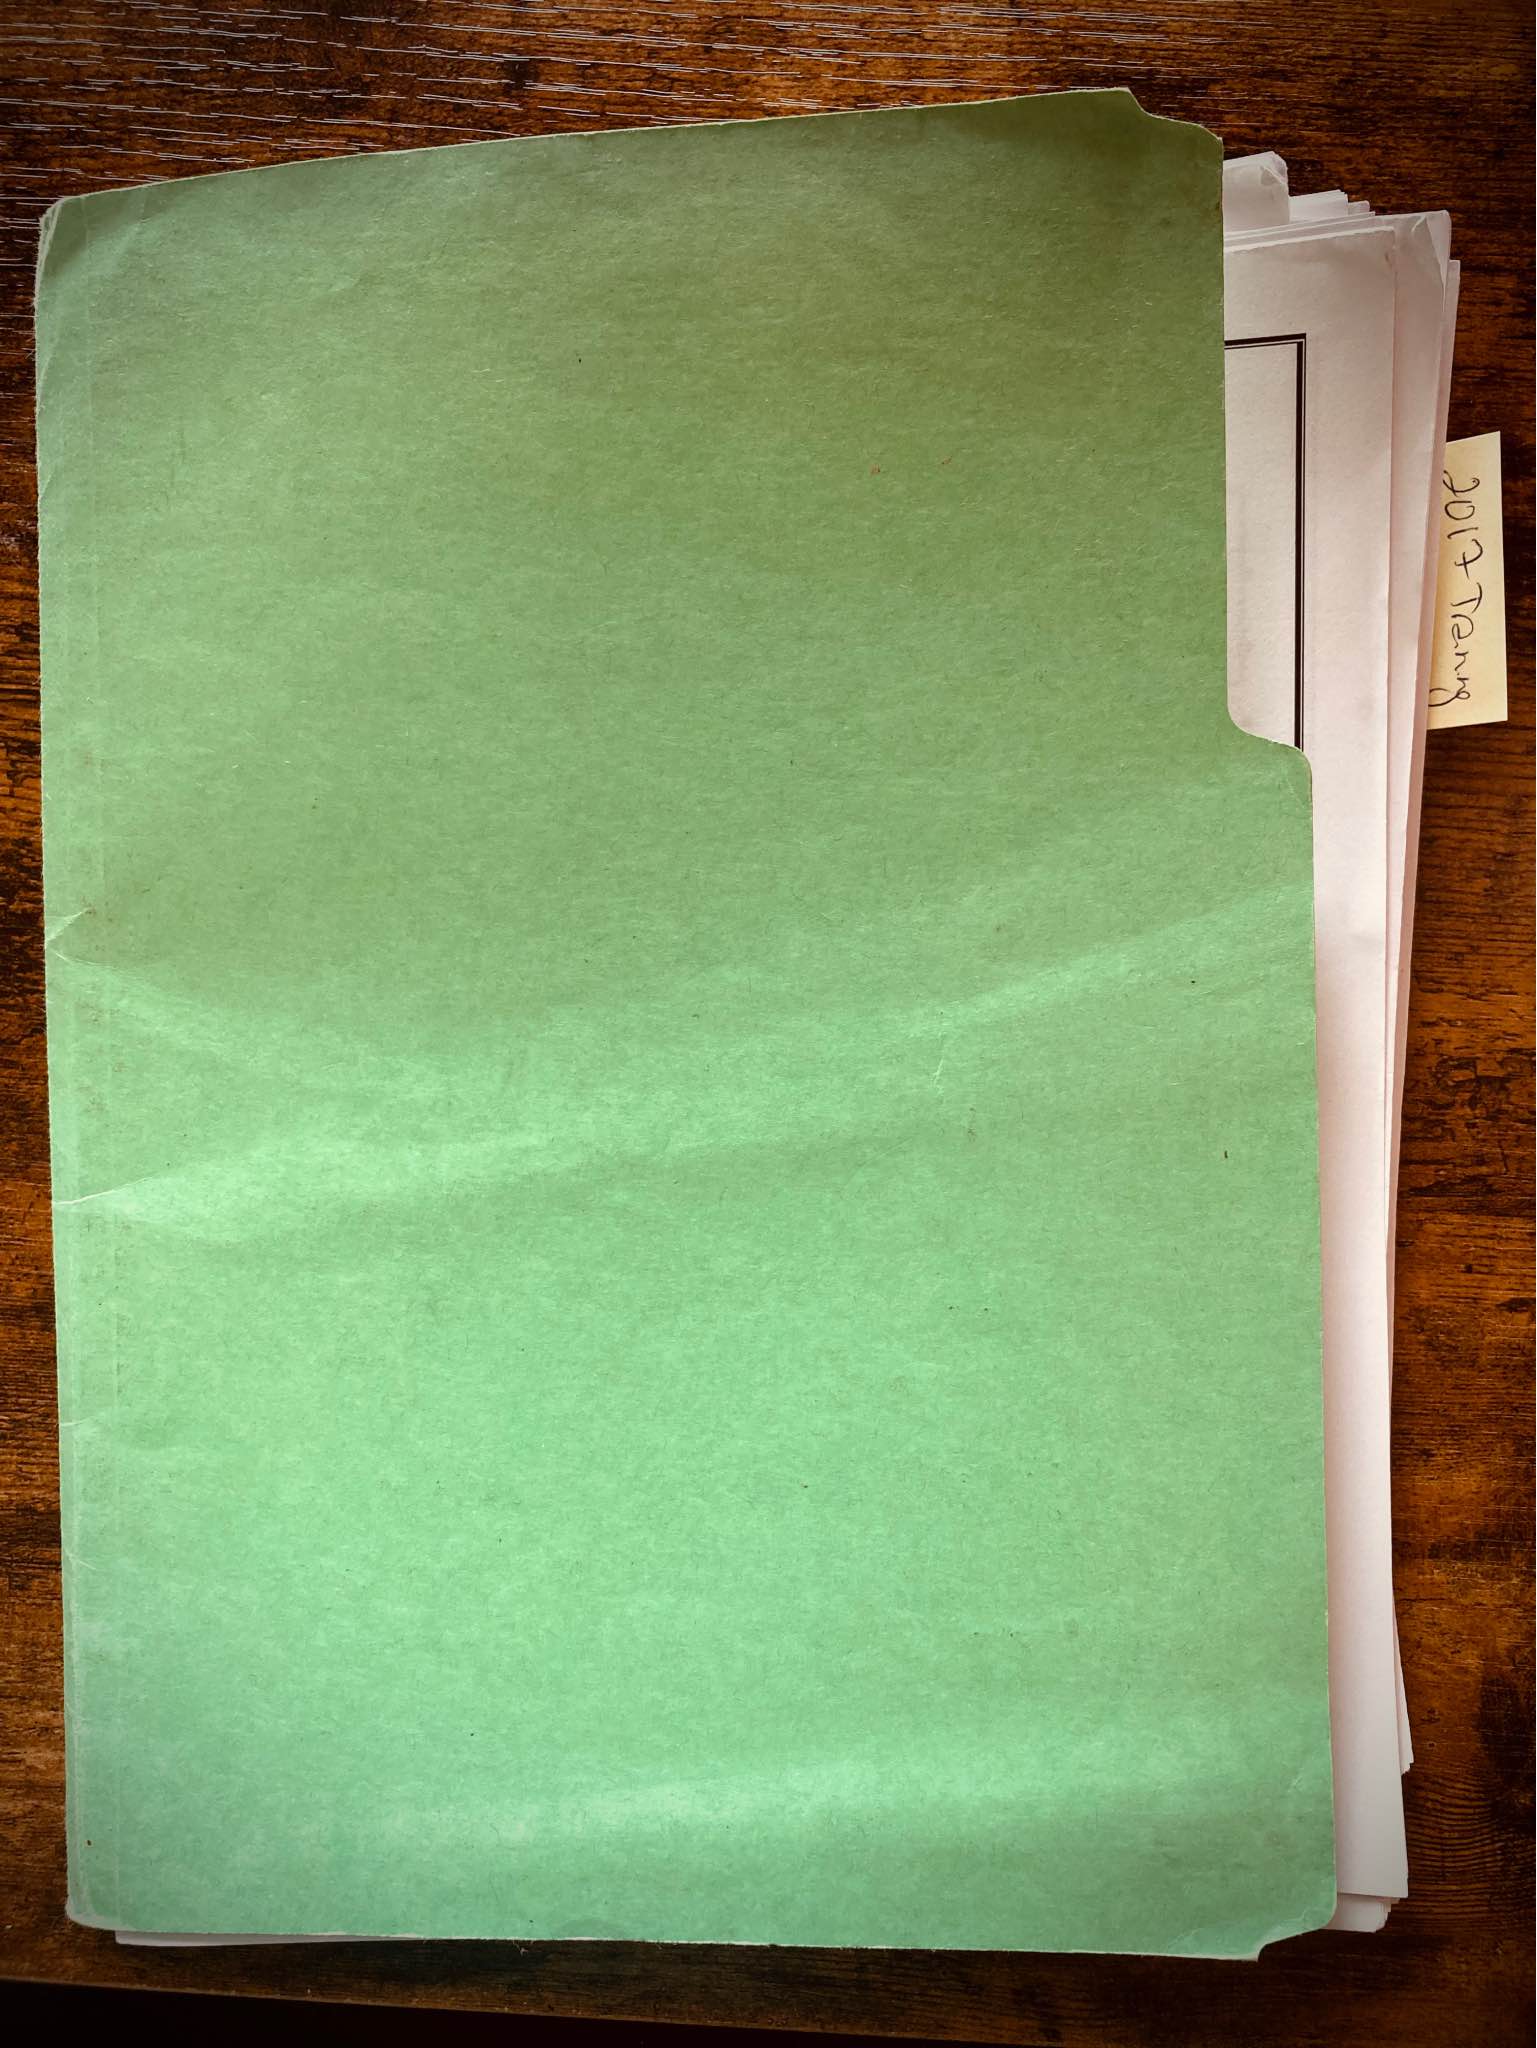 Photo of a green folder on a wooden desktop. The folder contains lots of dog-eared sheets of paper, with a post-it note sticking off the side that says "2017 Training."